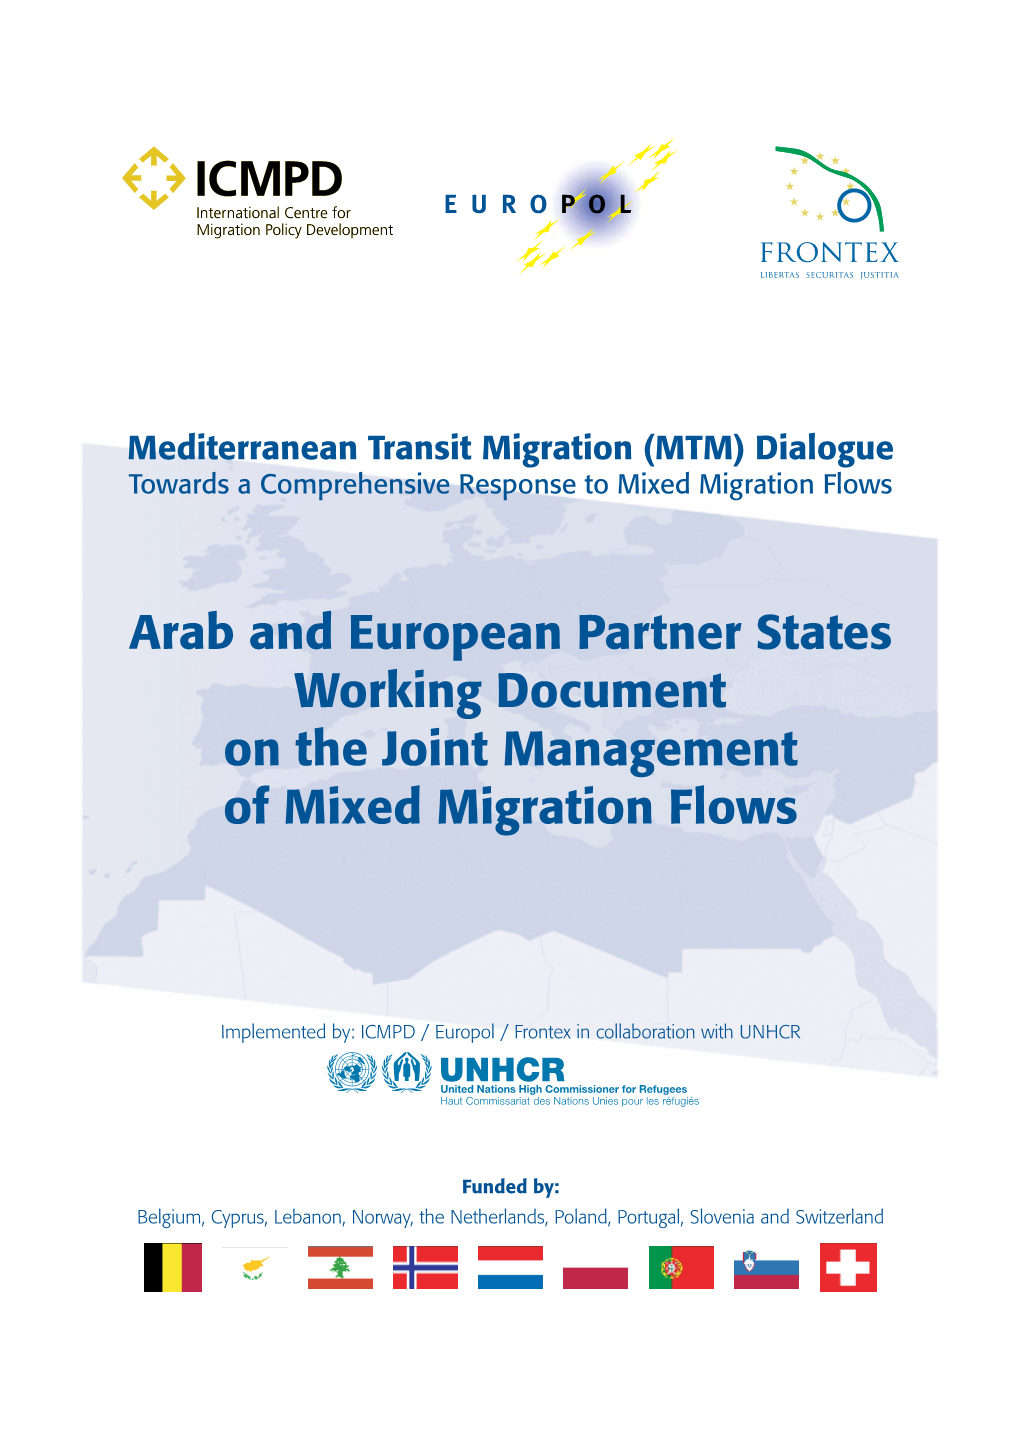 Arab and European Partner States Working Document on the Joint Management of Mixed Migration Flows